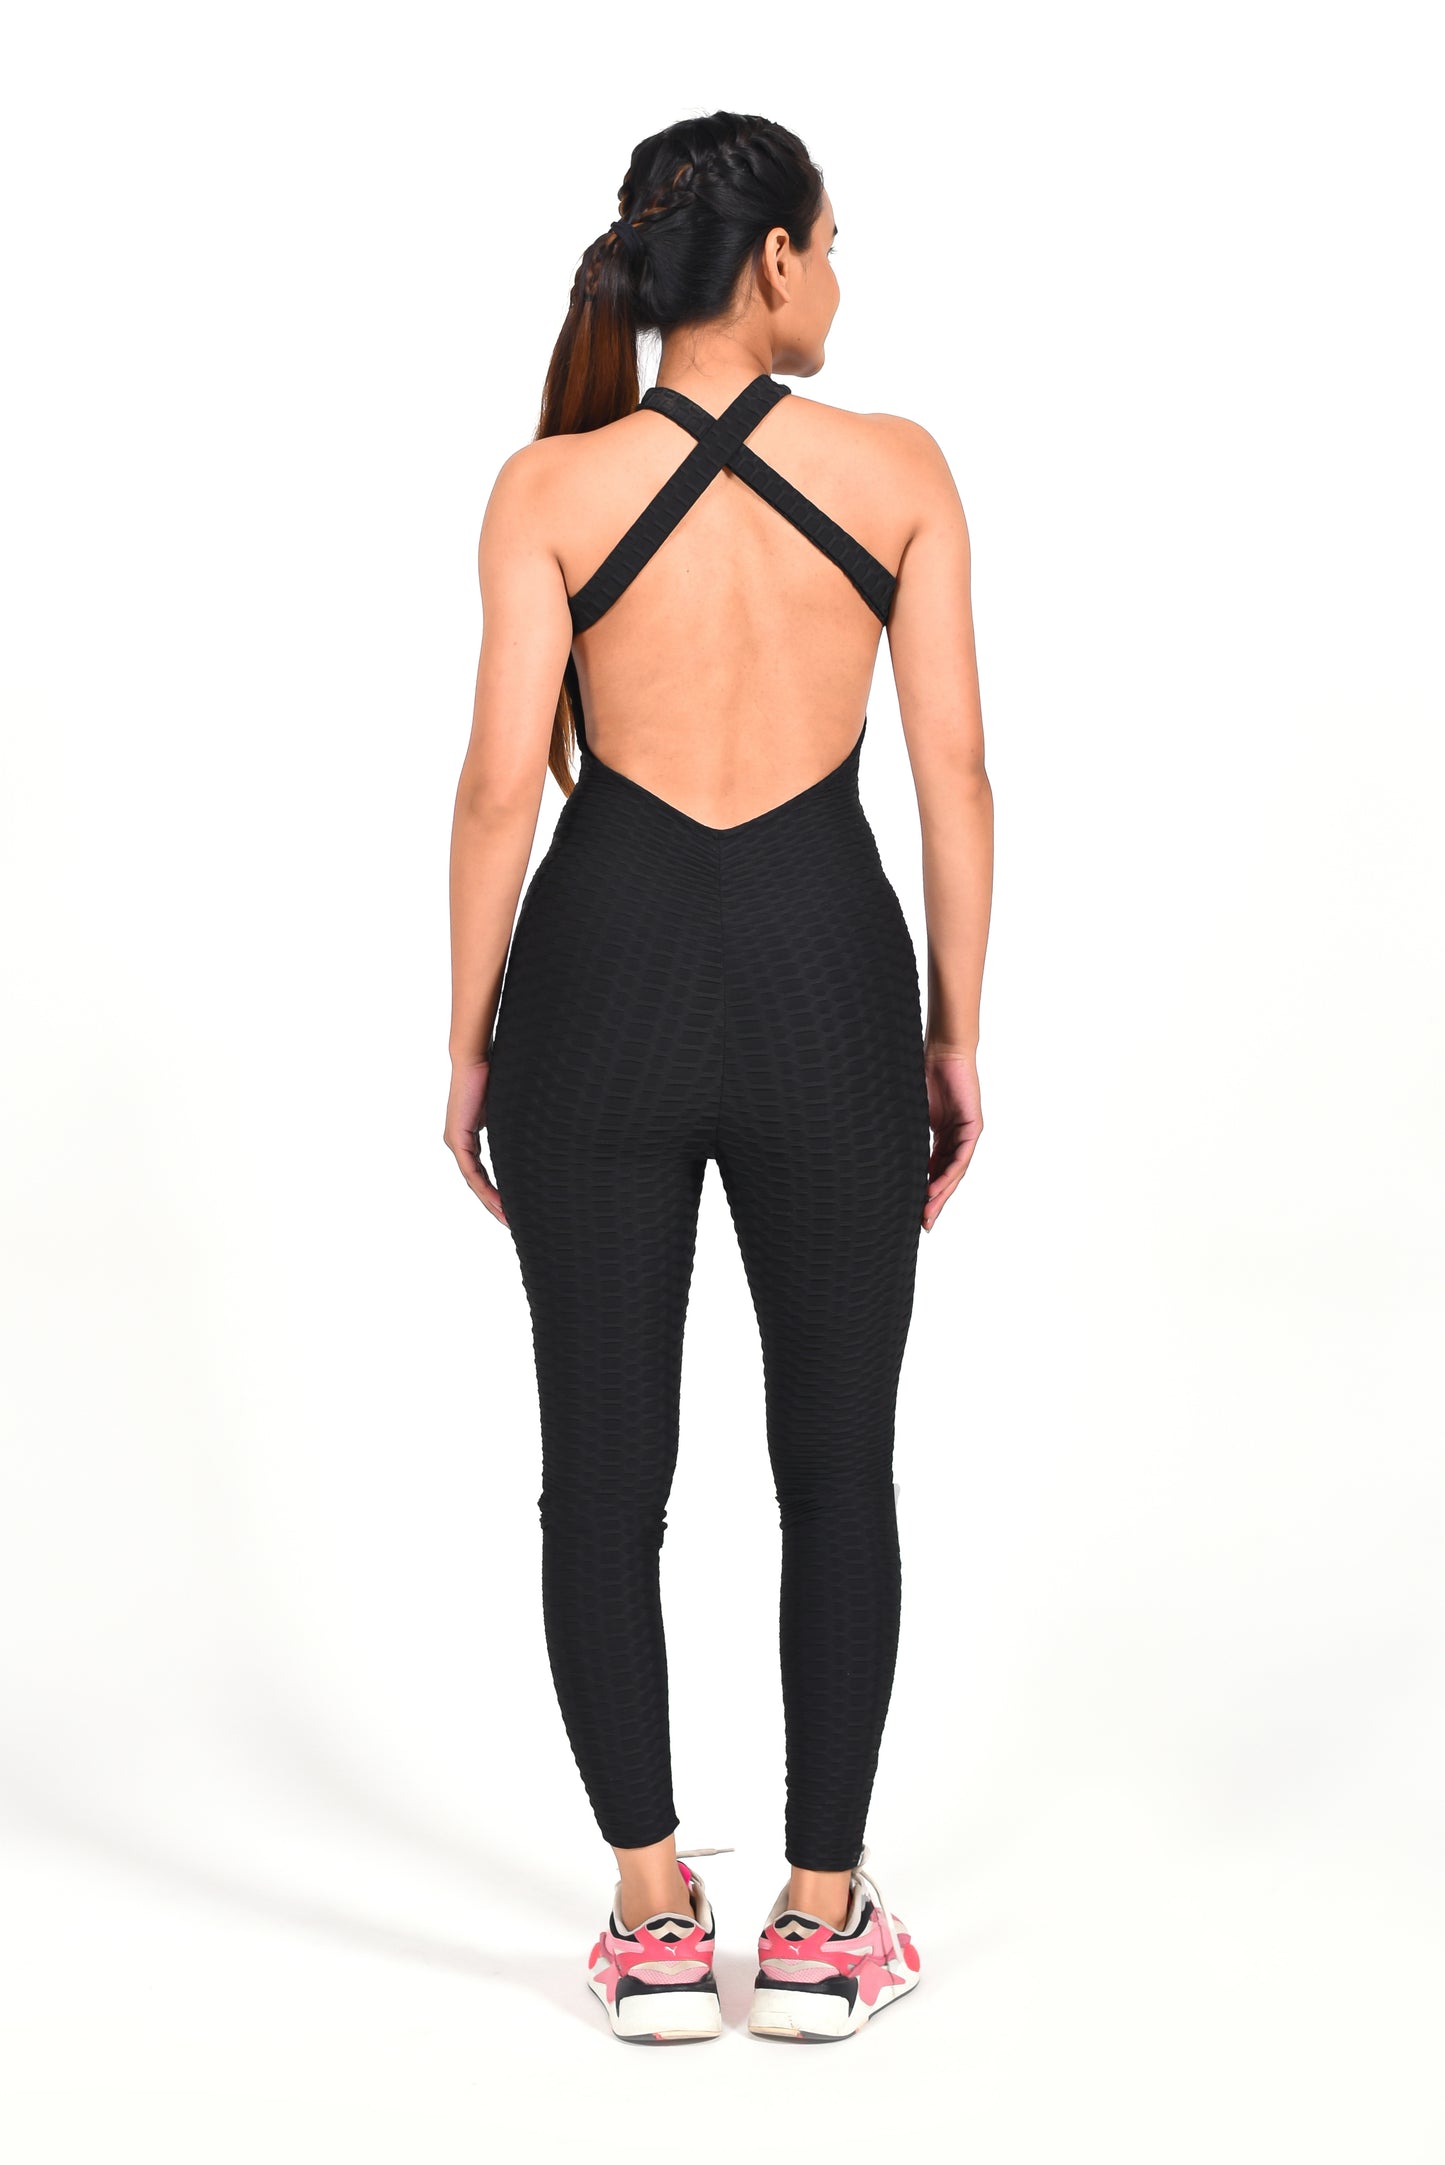 GYMSQUAD® ANTI-CELLULITE AND PUSH UP JUMPSUIT - BLACK